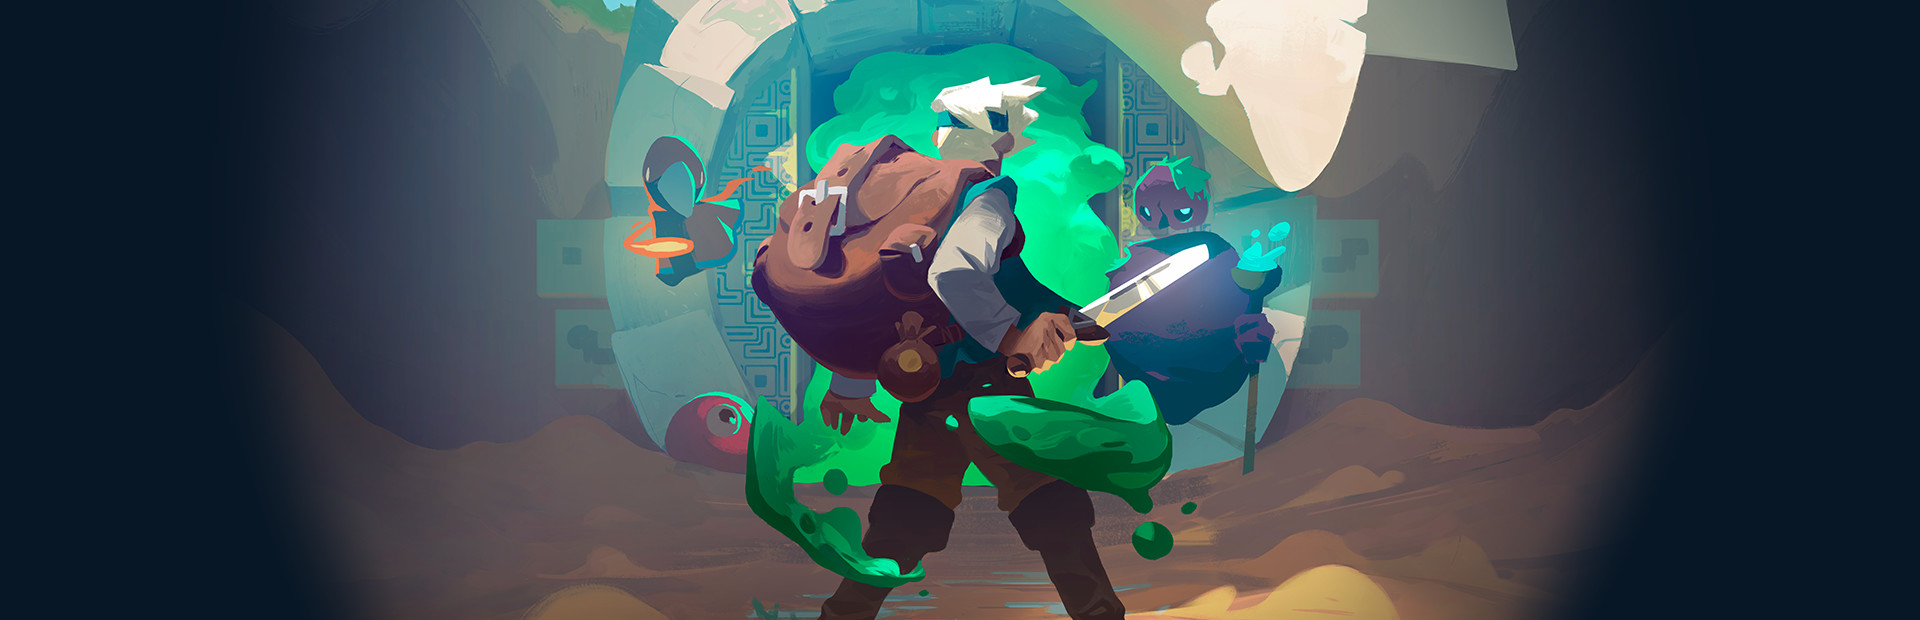 Moonlighter cover image